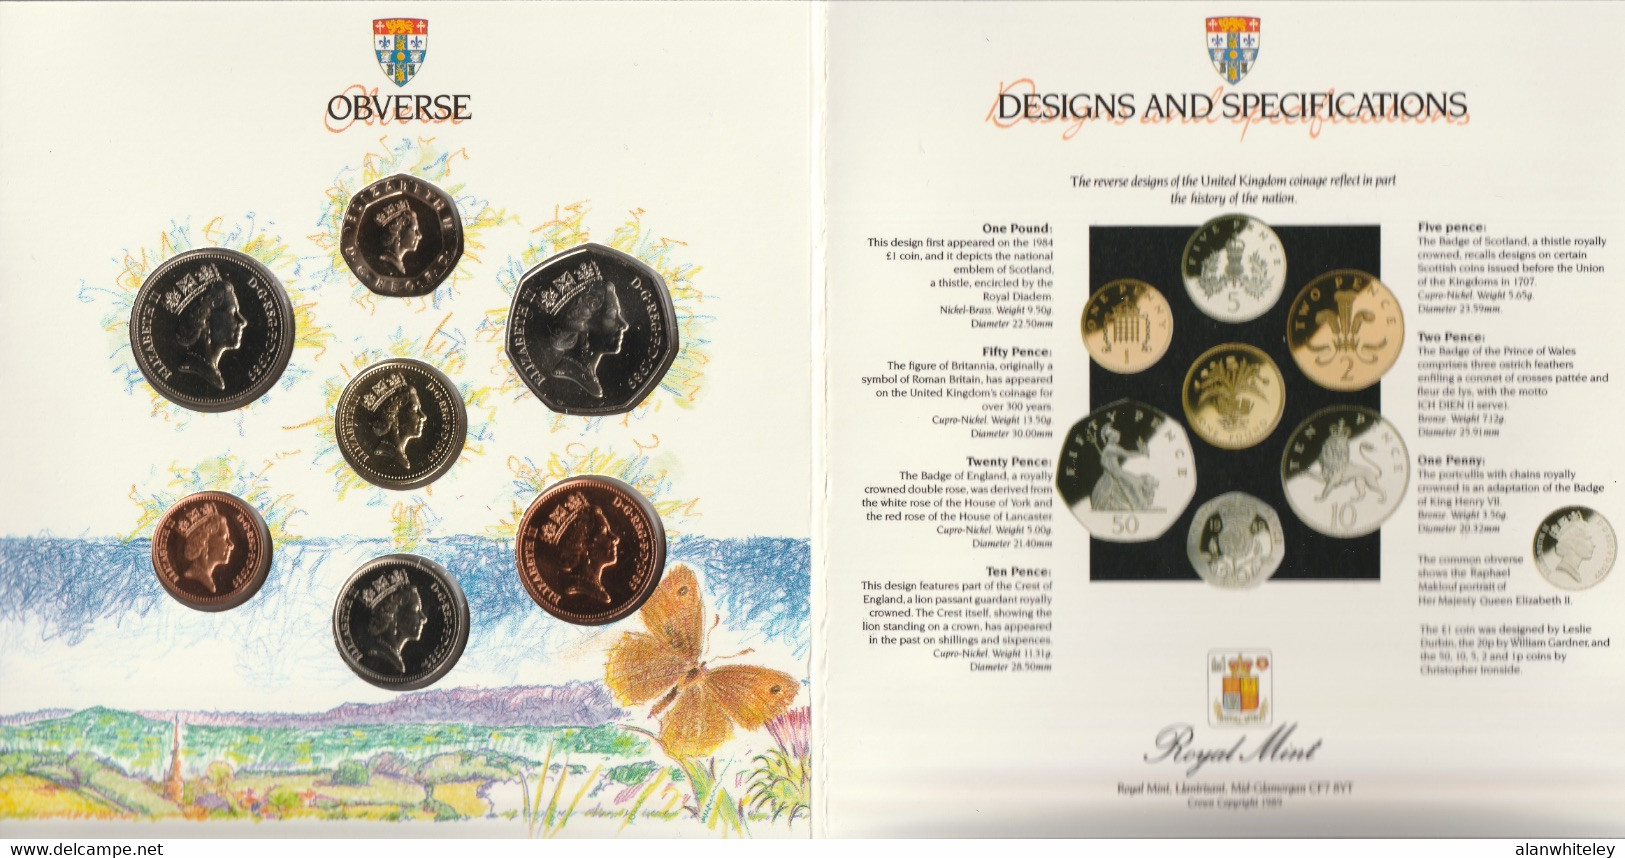 GREAT BRITAIN 1989 Annual Coin Collection: Set Of 7 Coins (in Pack) BRILLIANT UNCIRCULATED - Mint Sets & Proof Sets